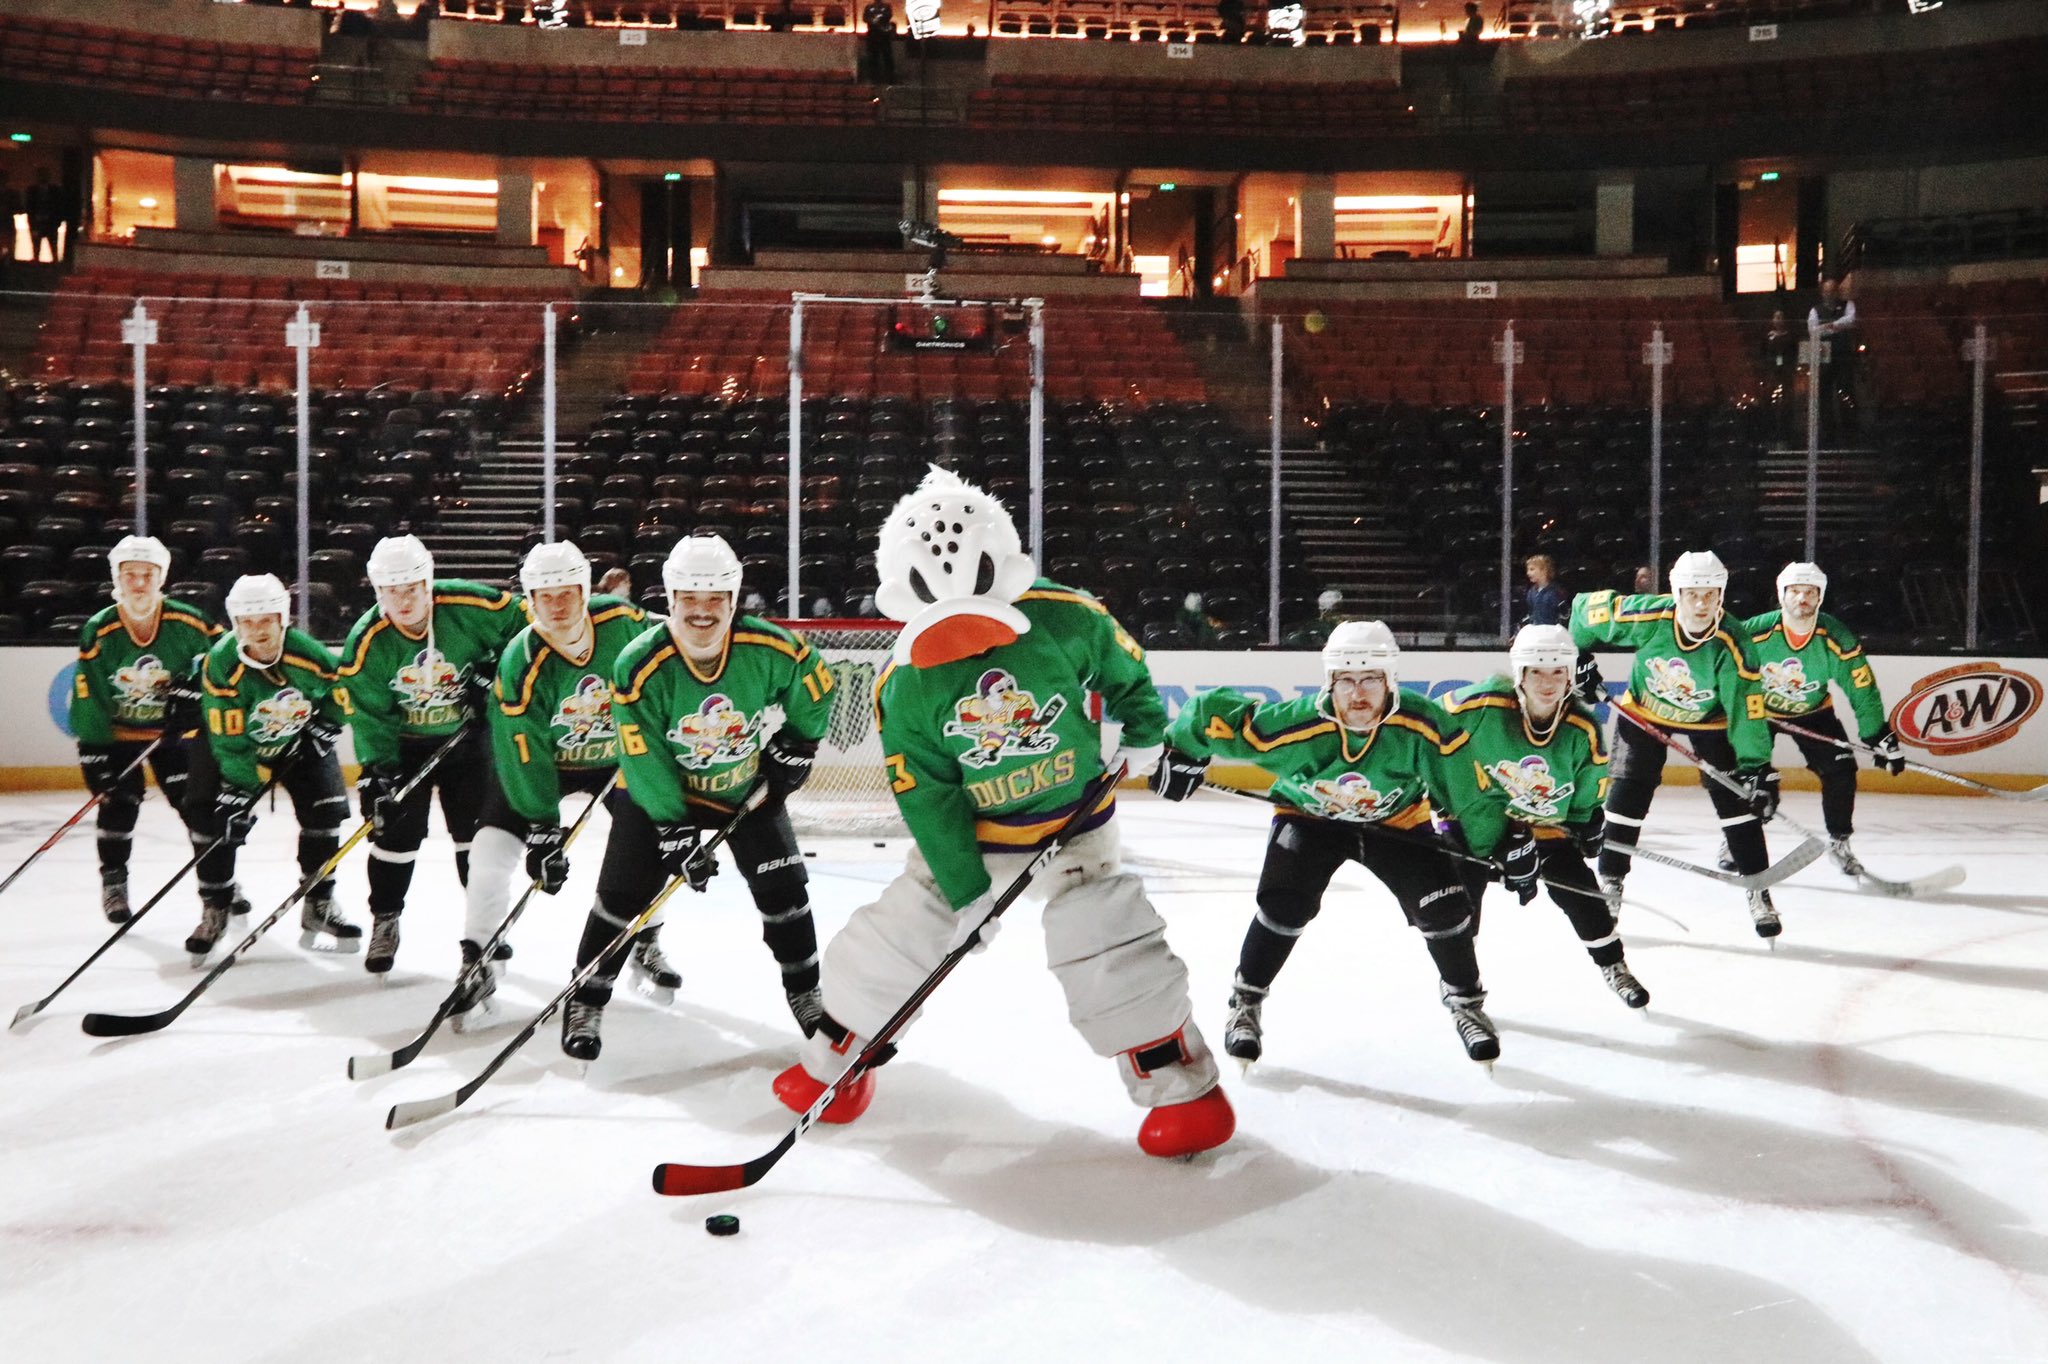 The Mighty Ducks make a triumphant return on Anaheim's reported new third  jersey - The Hockey News